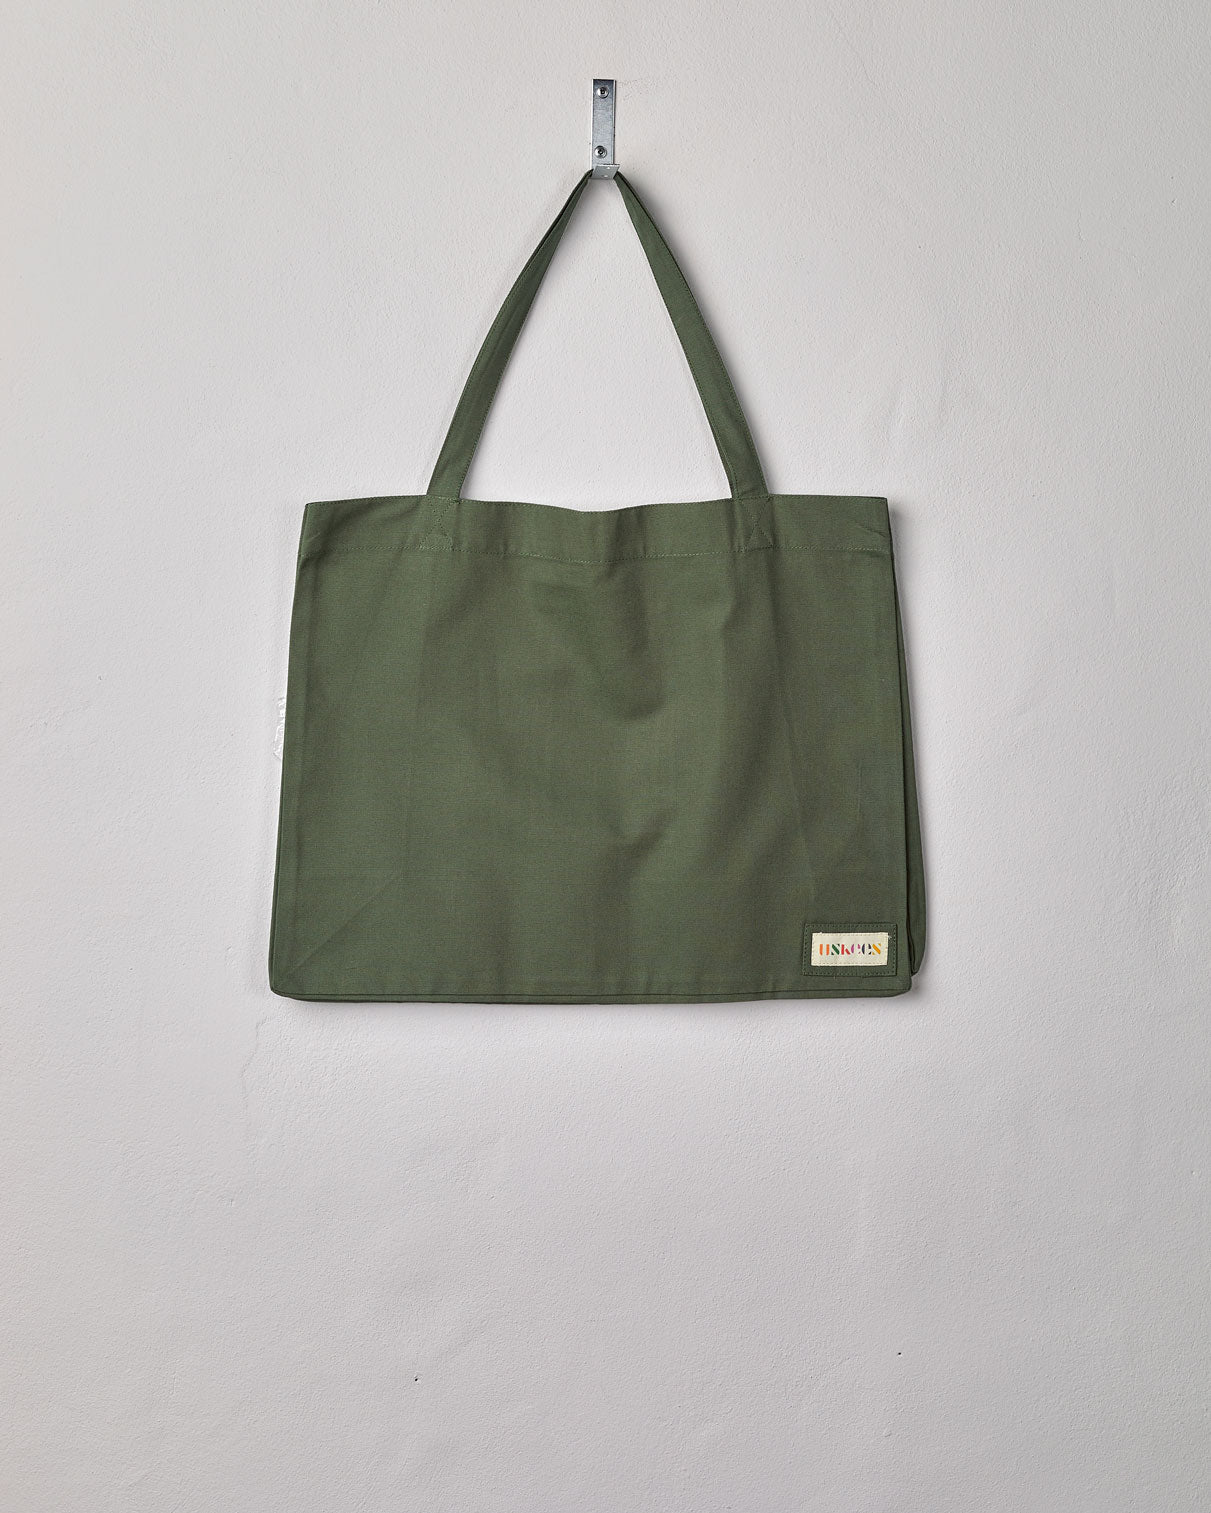 Full front hanging shot of Uskees #4001 large coriander-green tote bag, showing double handles and Uskees woven logo.